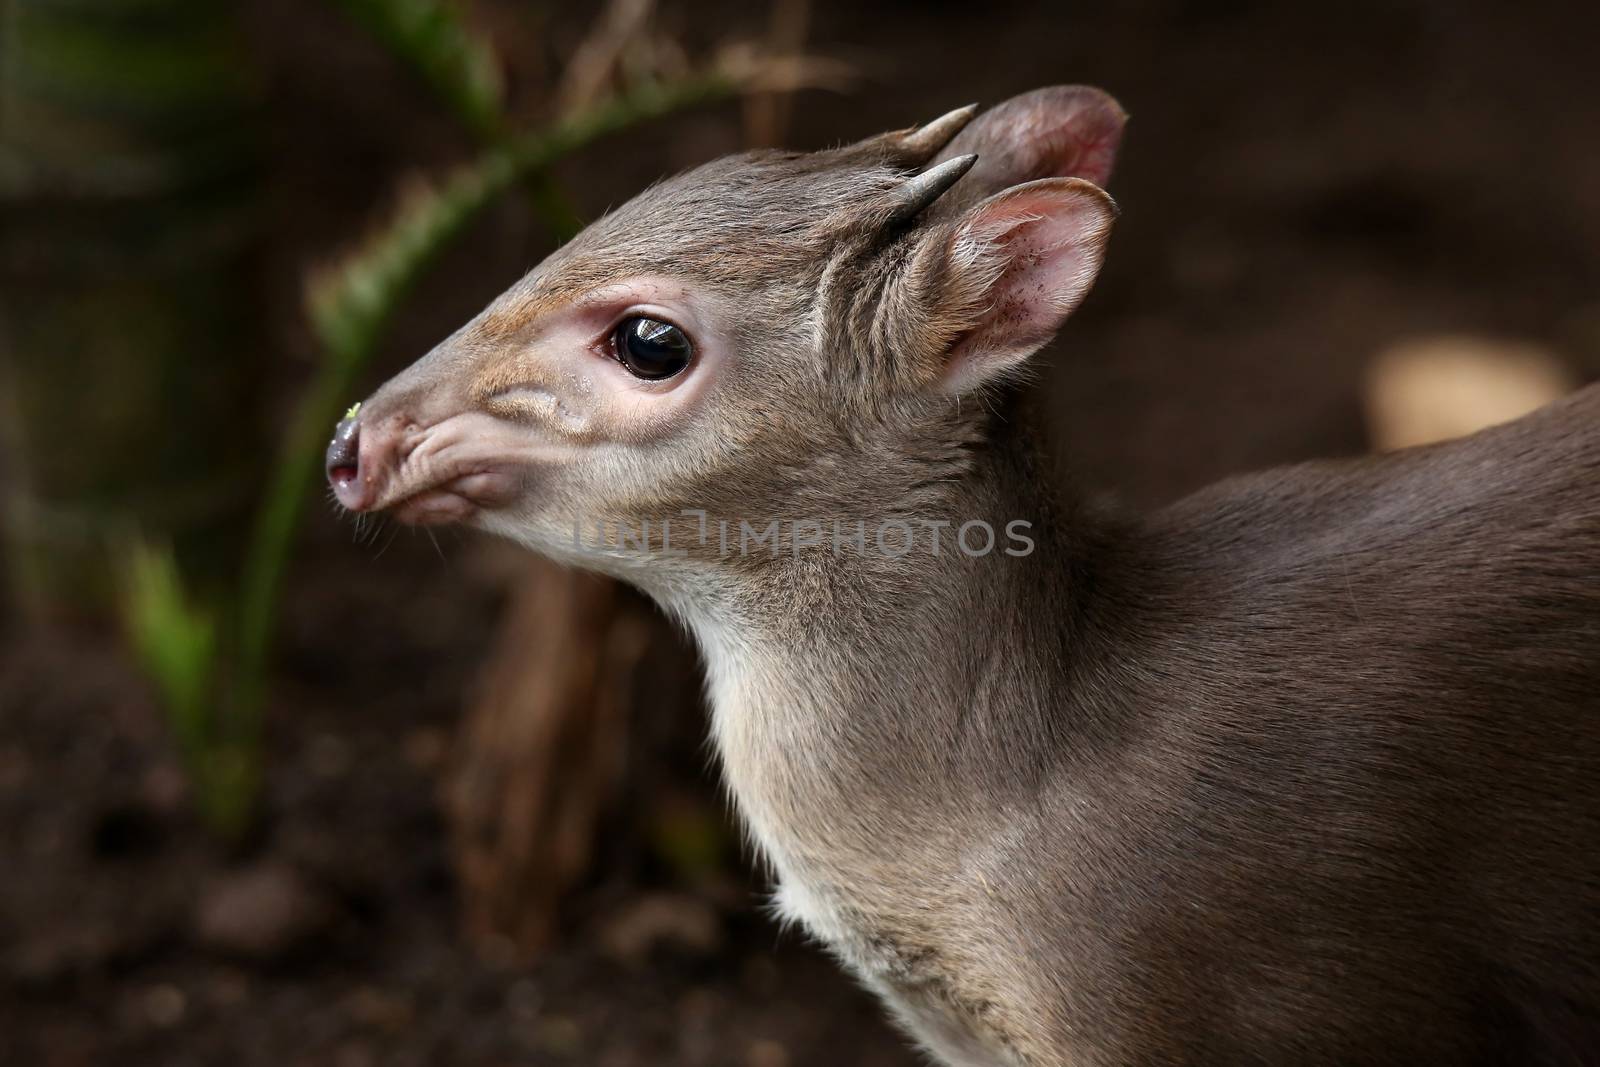 The cute and very shy Blue Duiker antelope in the undergrowth of the forest